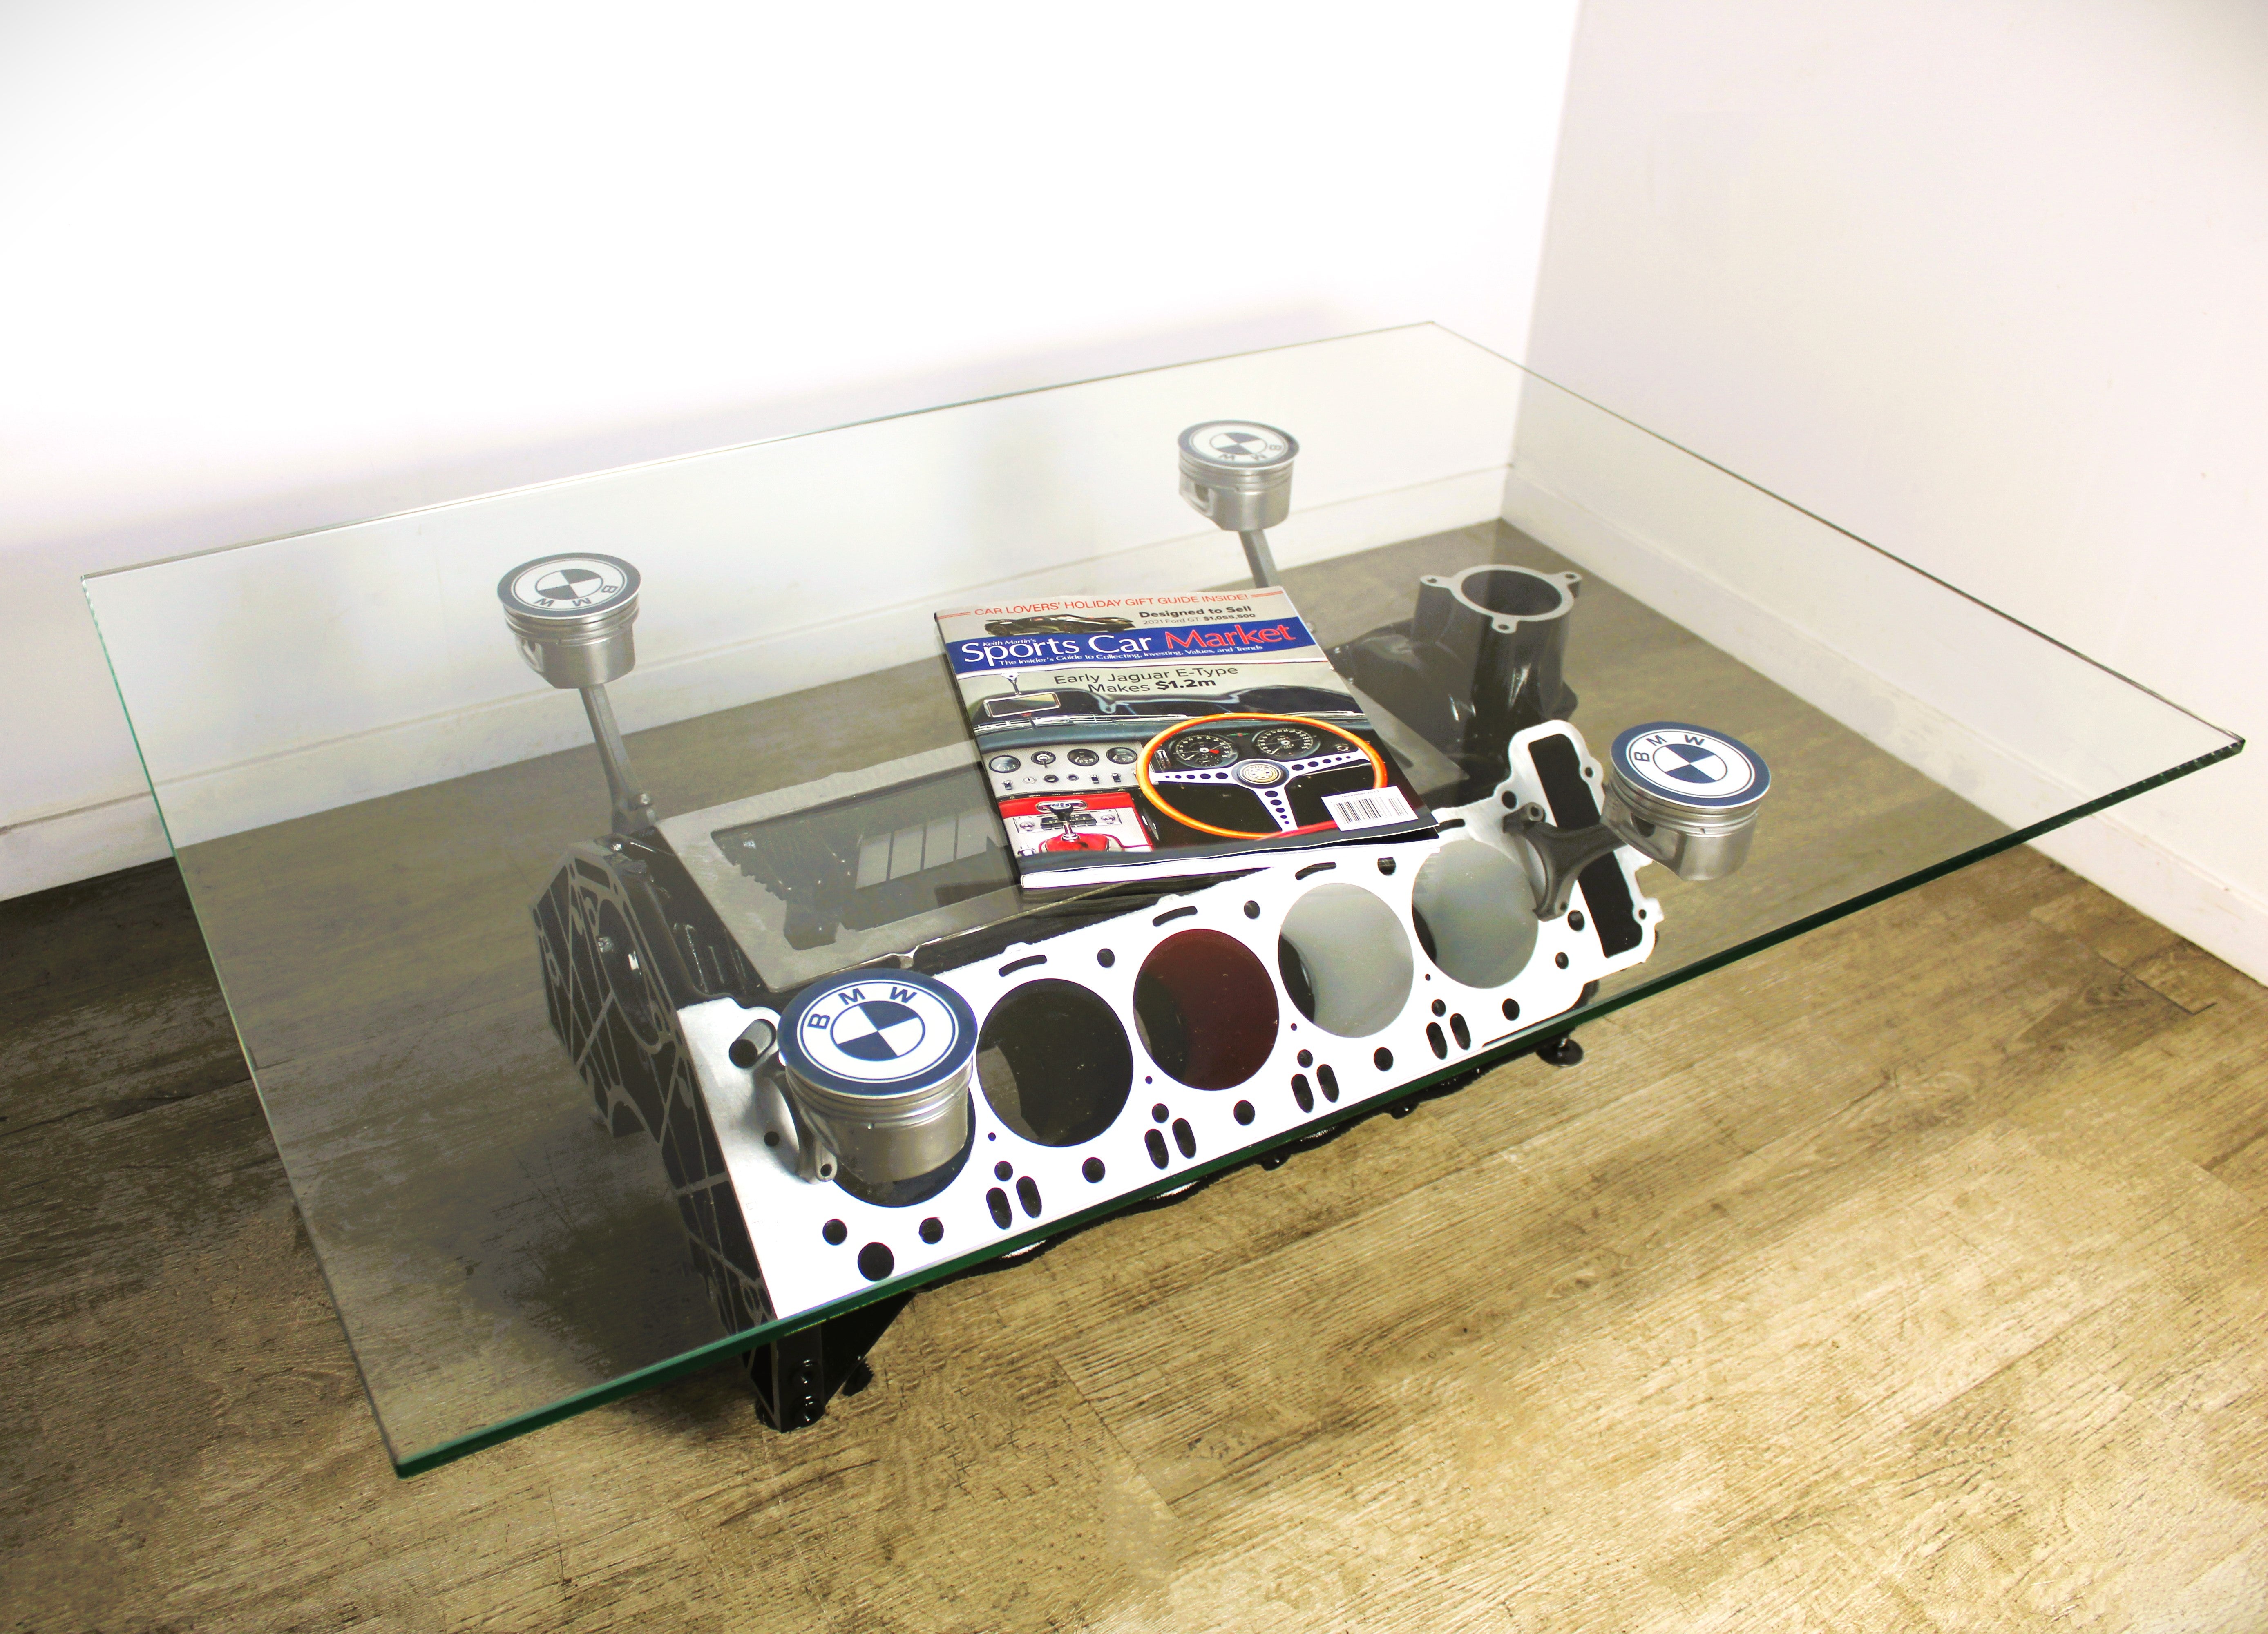 BMW M Series V10 engine block coffee table painted in the BMW M-Power color scheme with a rectangular glass top, the M-Power logo displayed across the piece, and the BMW logo on each of the four car pistons. A sports car magazine rests on top.